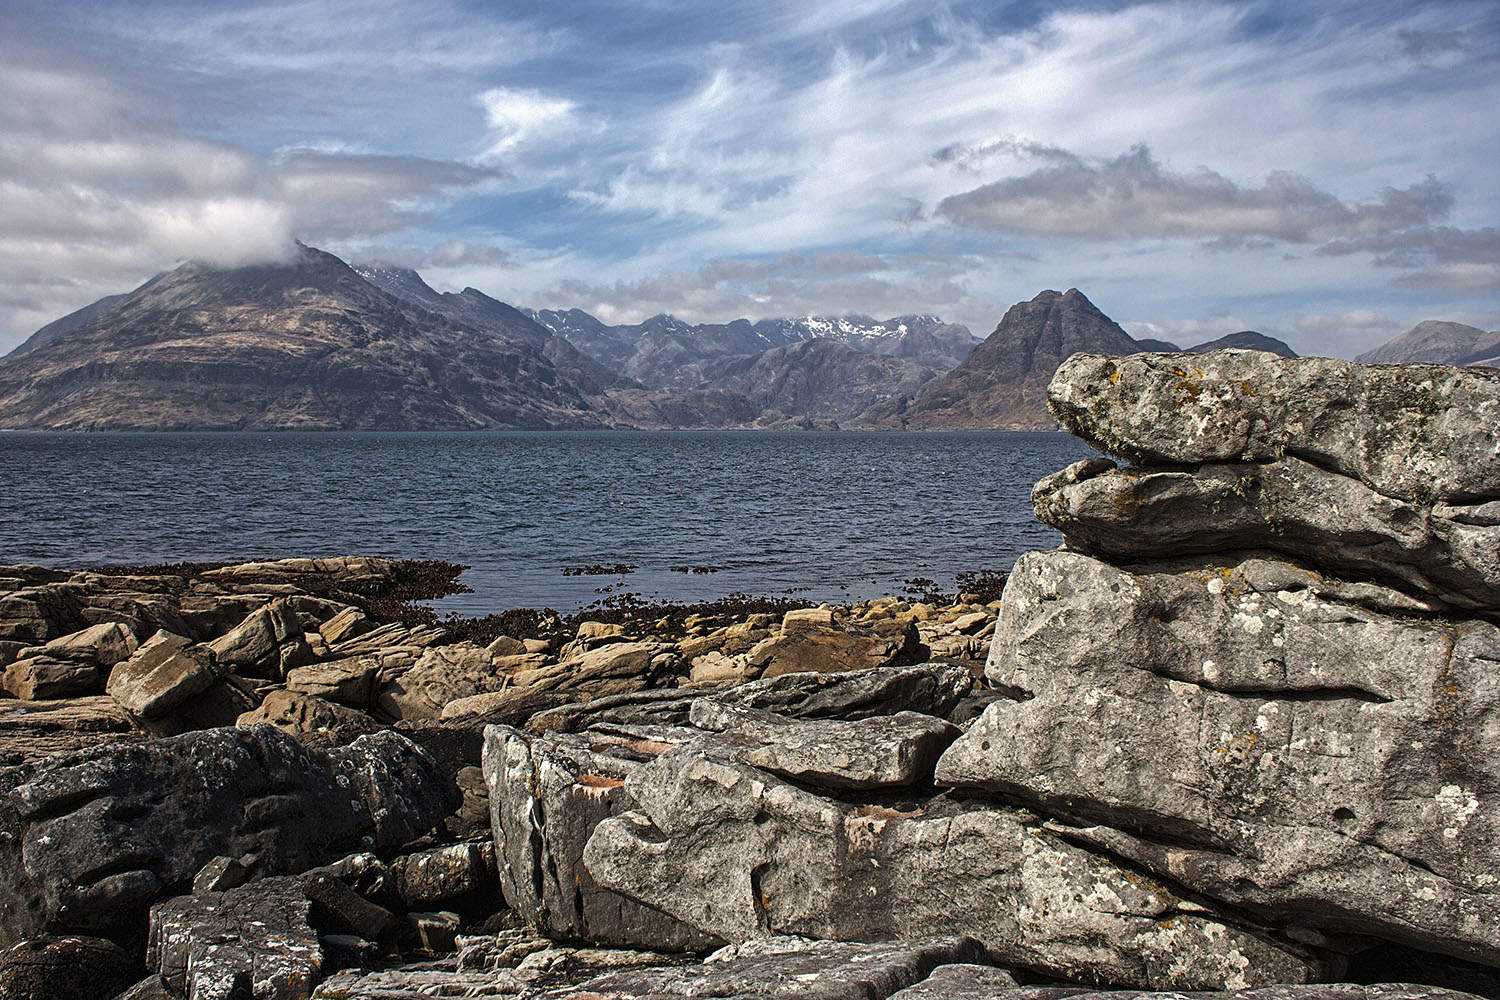 The classic view of the Cuillins from Elgol